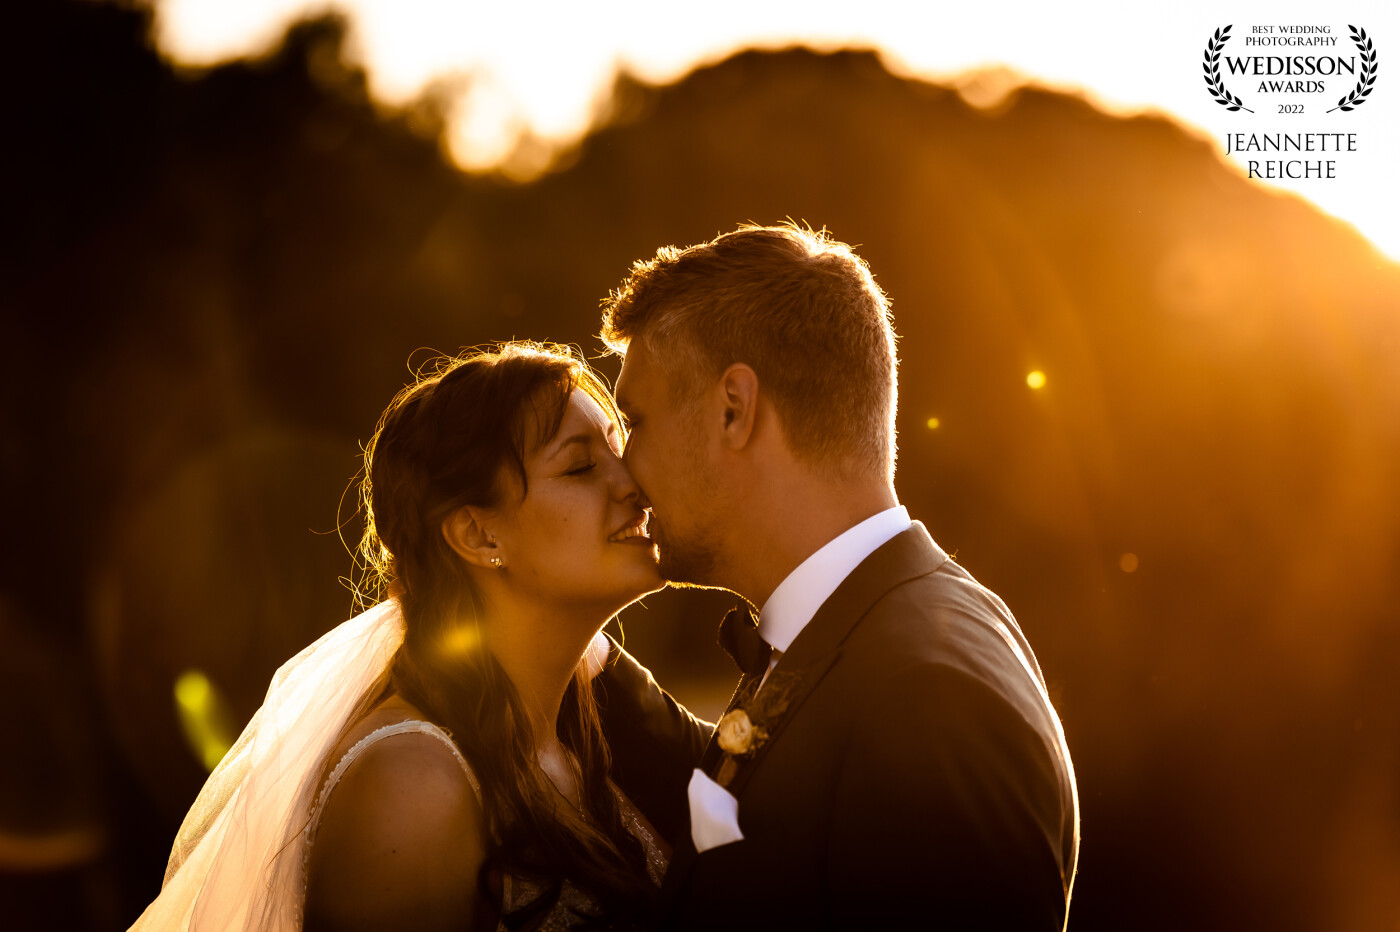 The bridal couple at the sunset shoot. I always find it fascinating to capture the couples in the golden light. This always gives the picture something soulful and soft.